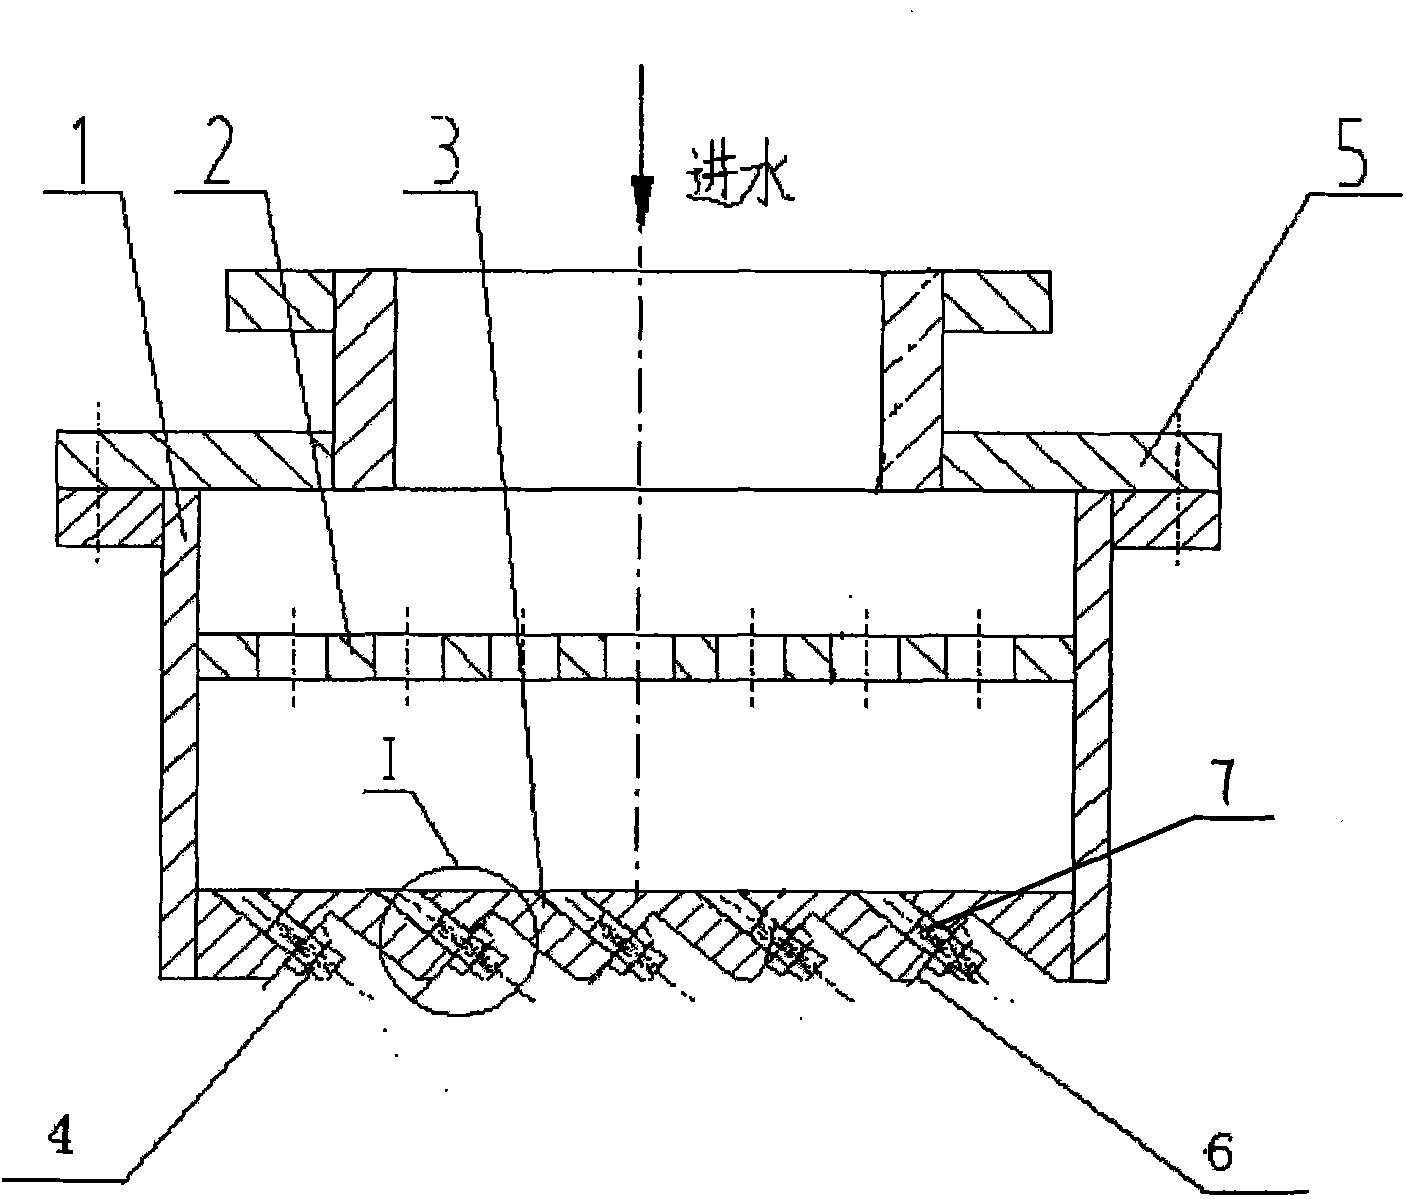 Medium plate on-line quenching inclined jet flow cooler